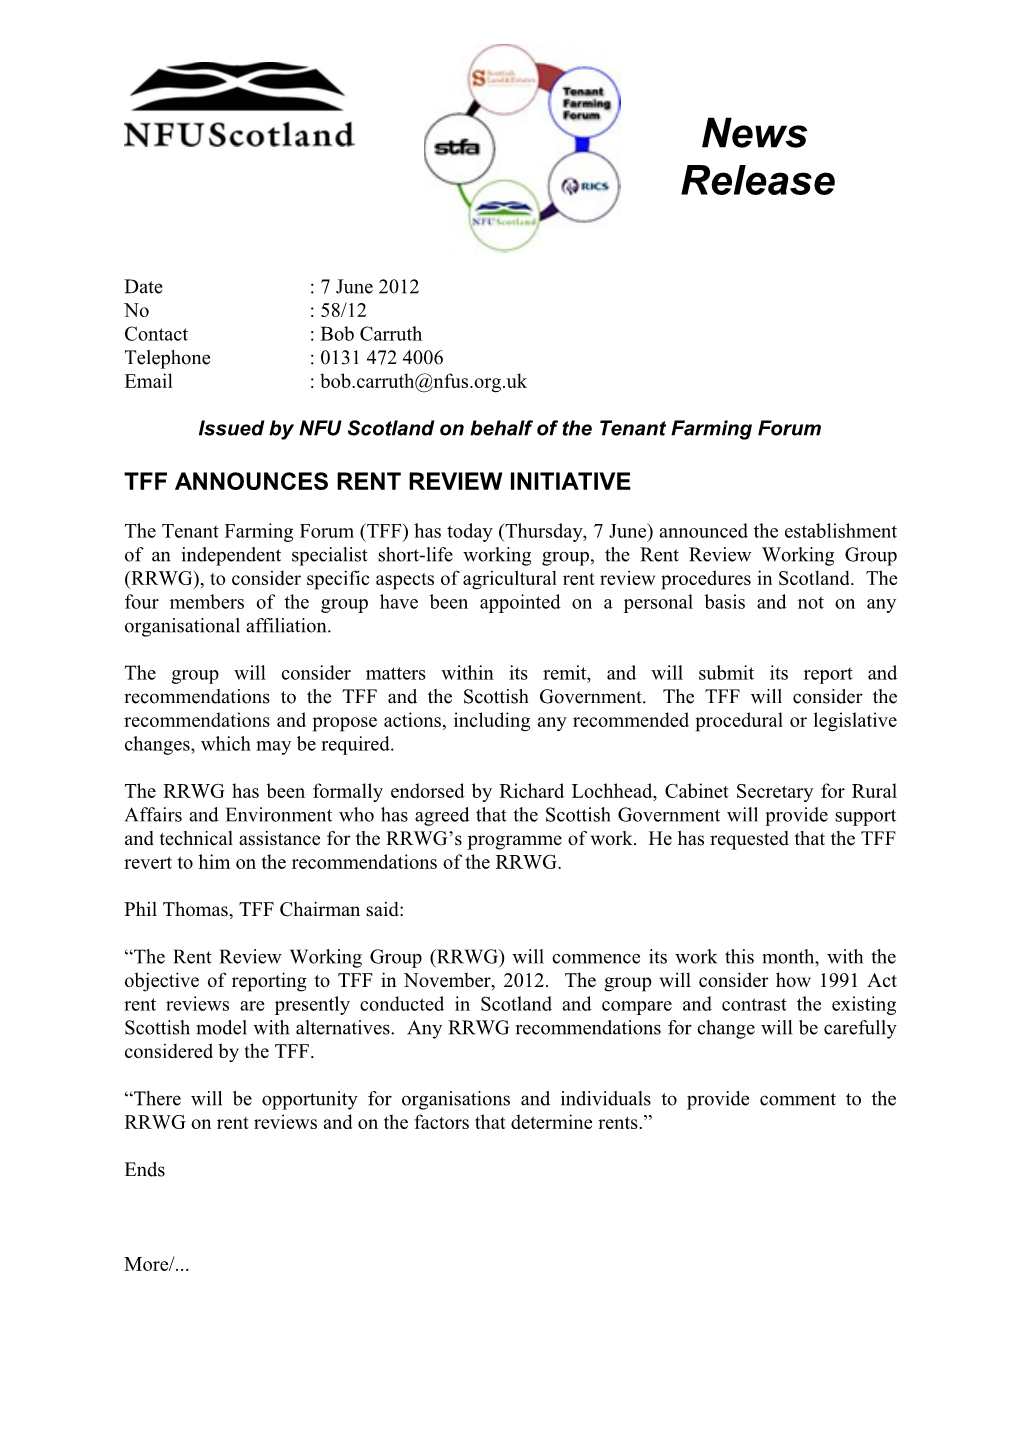 Issued by NFU Scotland on Behalf of the Tenant Farming Forum